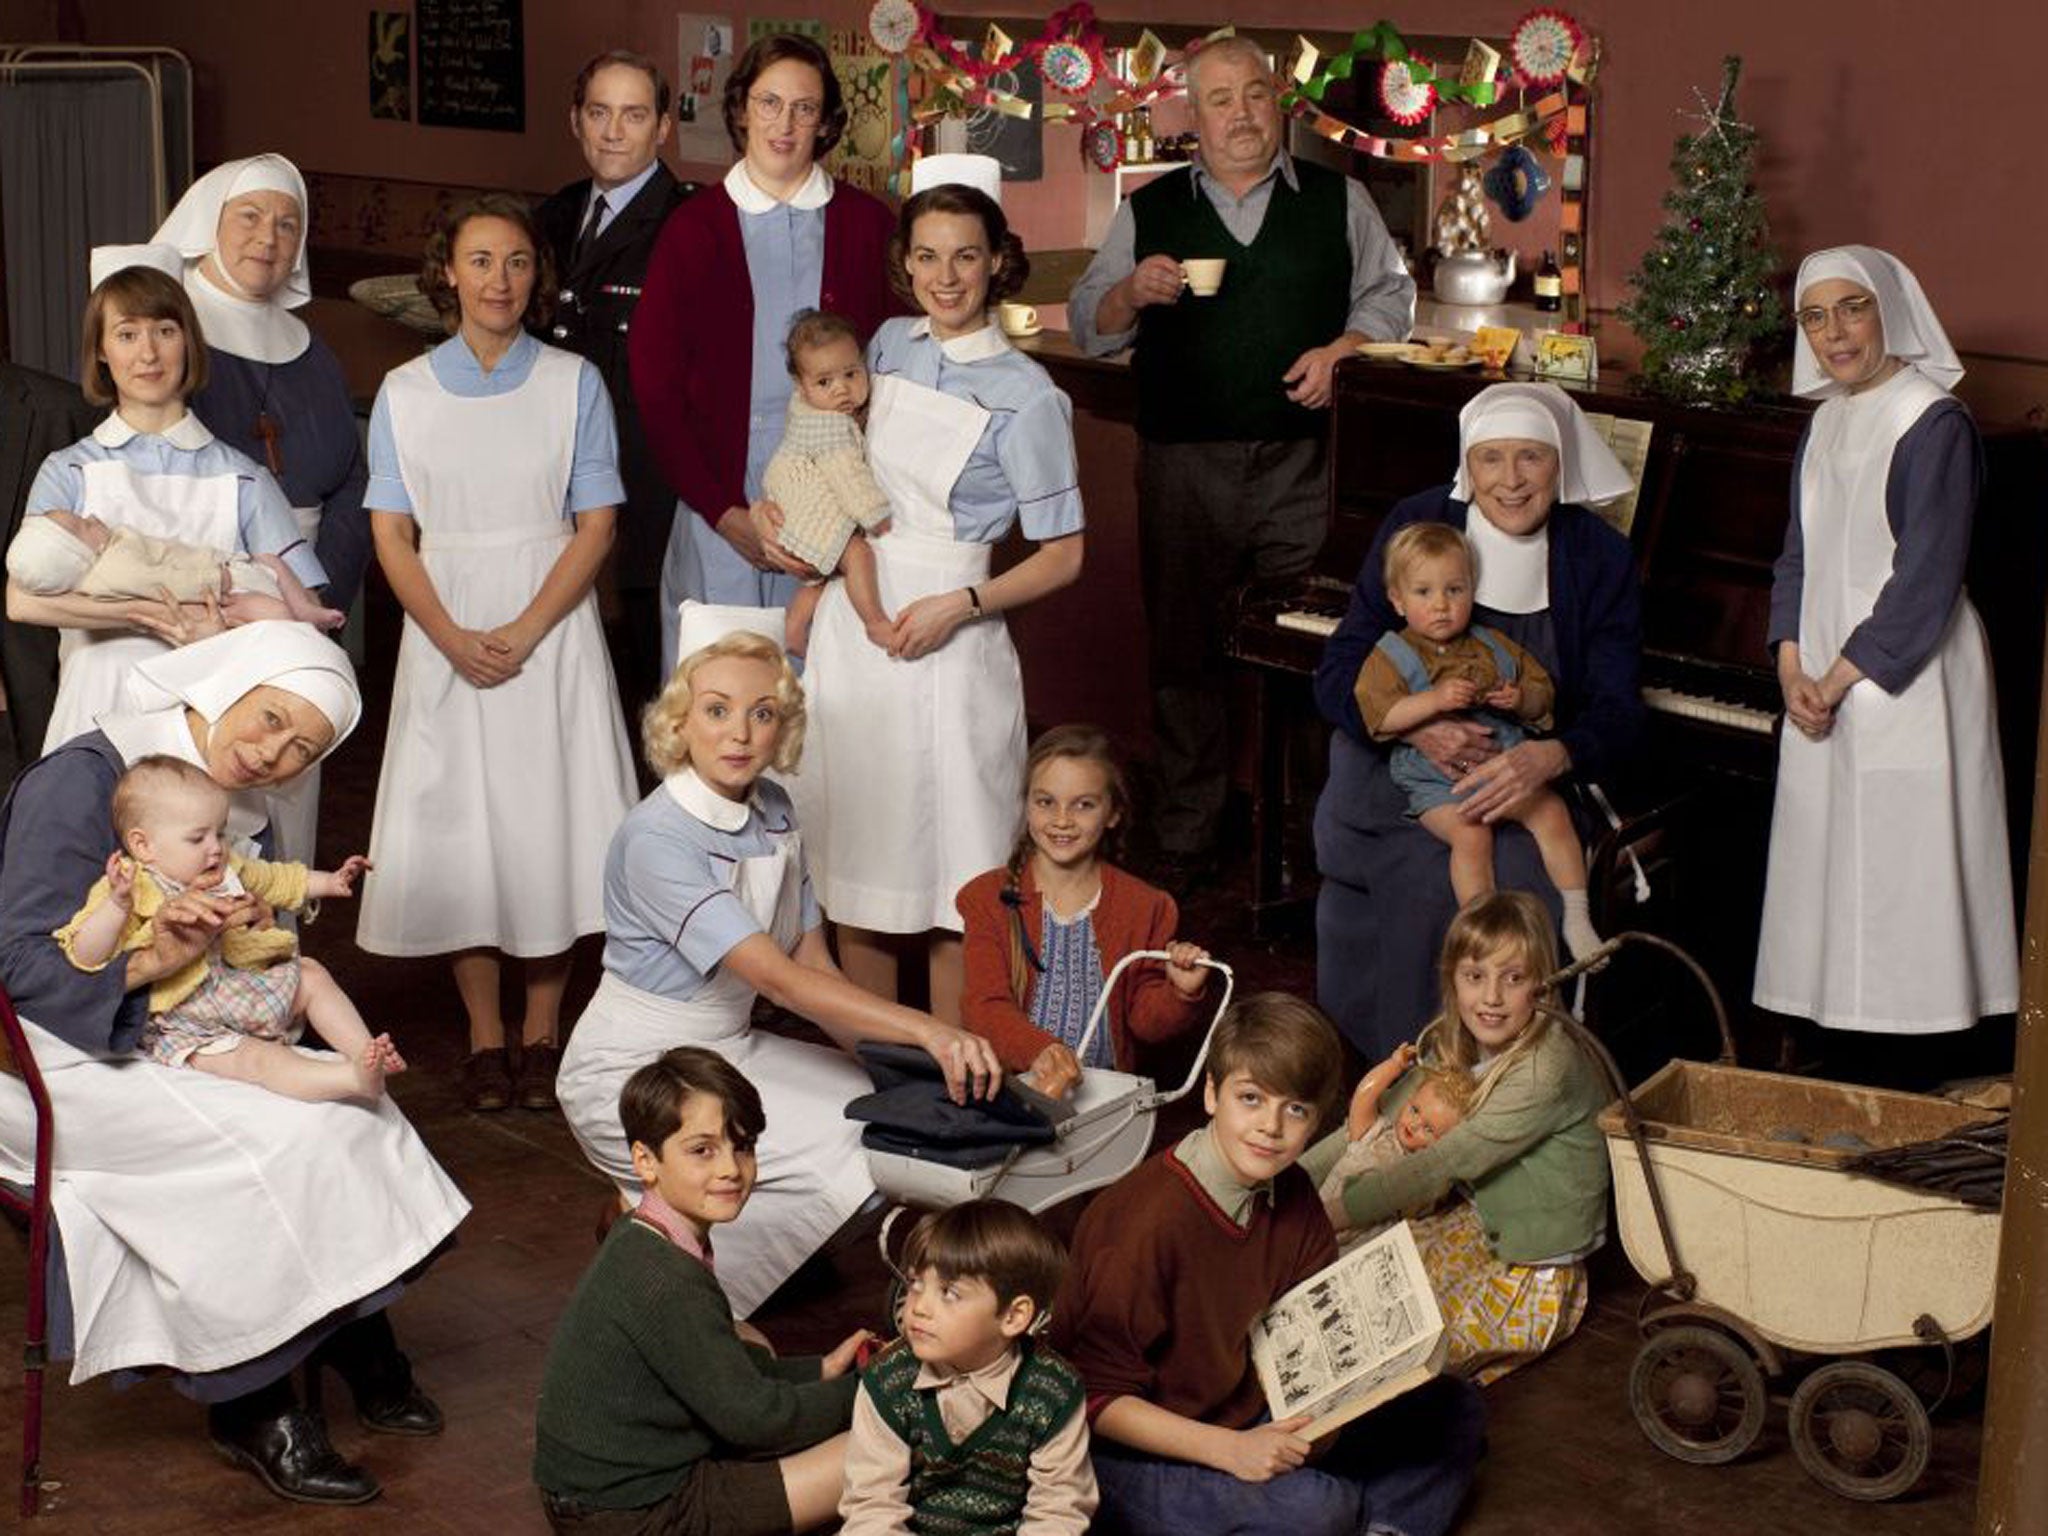 Call the Midwife, Christmas Special, BBC One, 5th Dec 2012